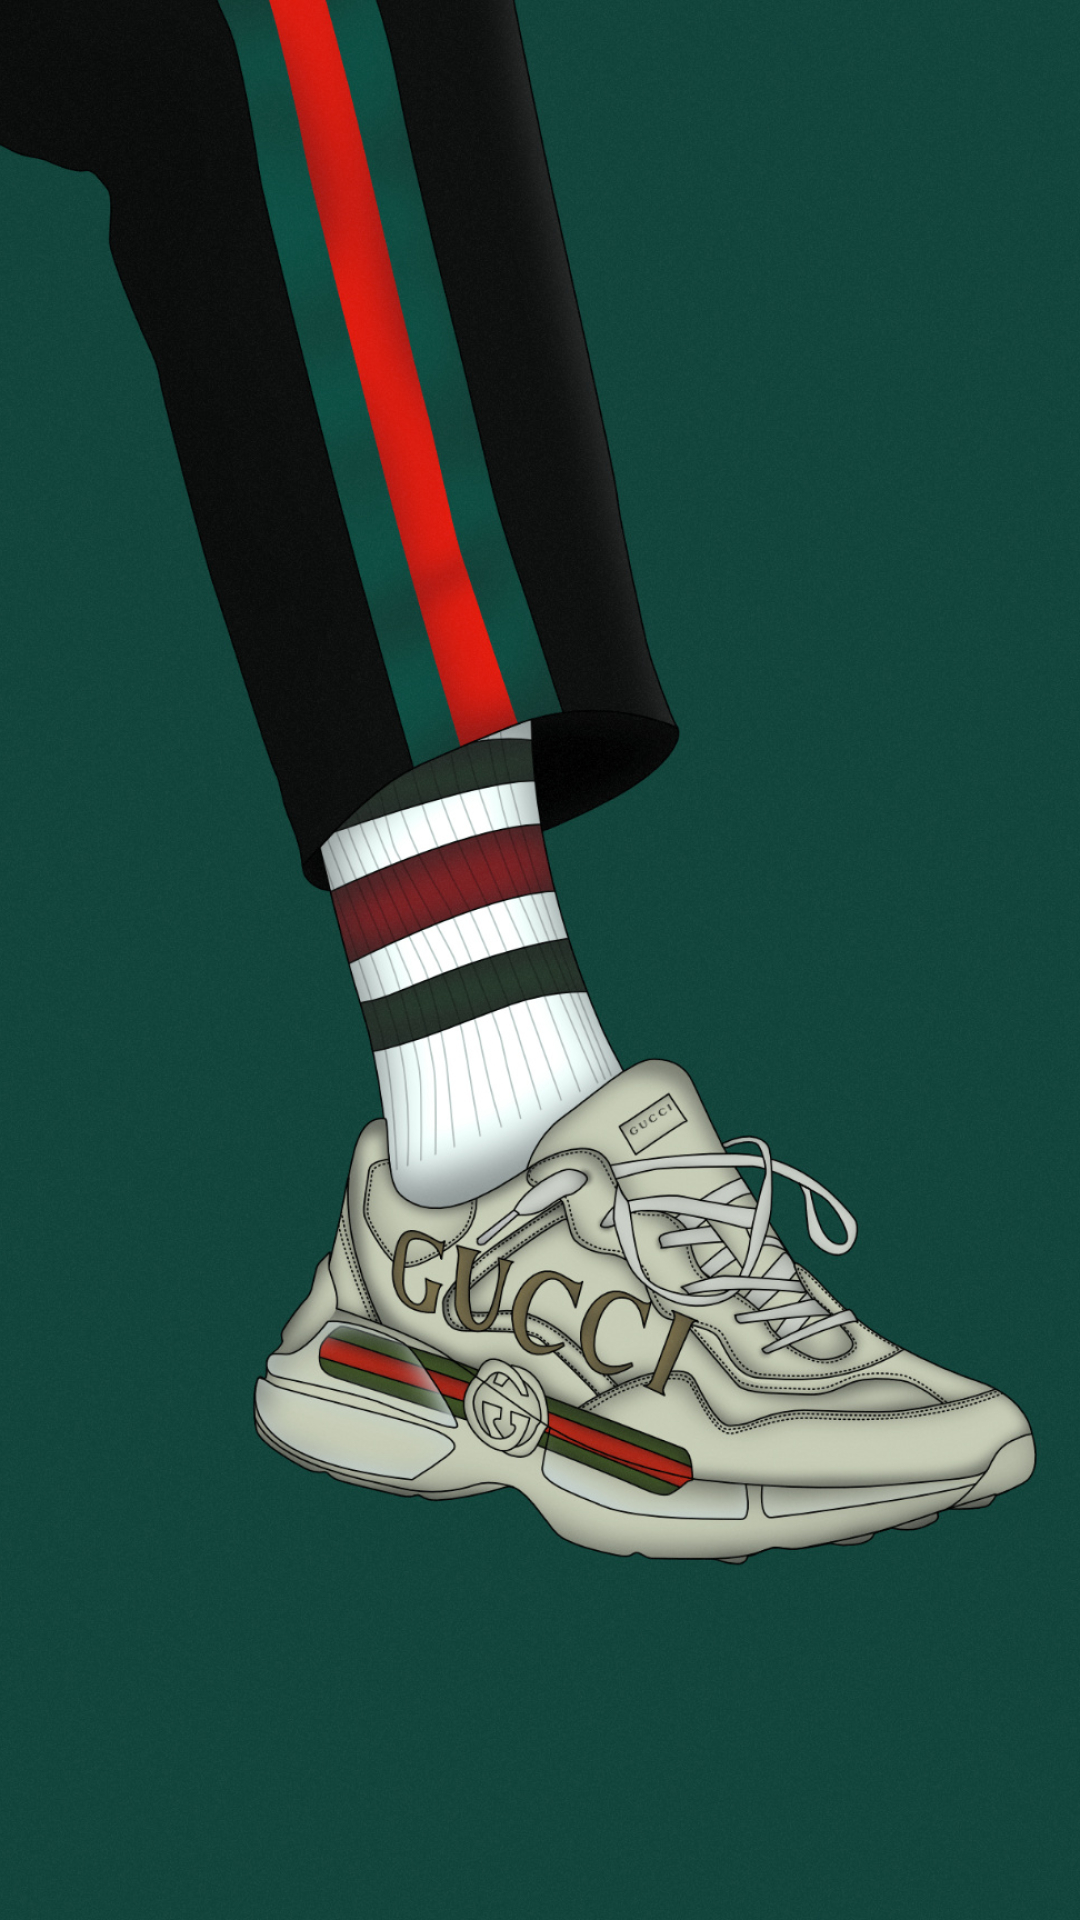 Gucci: The branded red and green woven stripe, The renowned color palette. 1080x1920 Full HD Background.